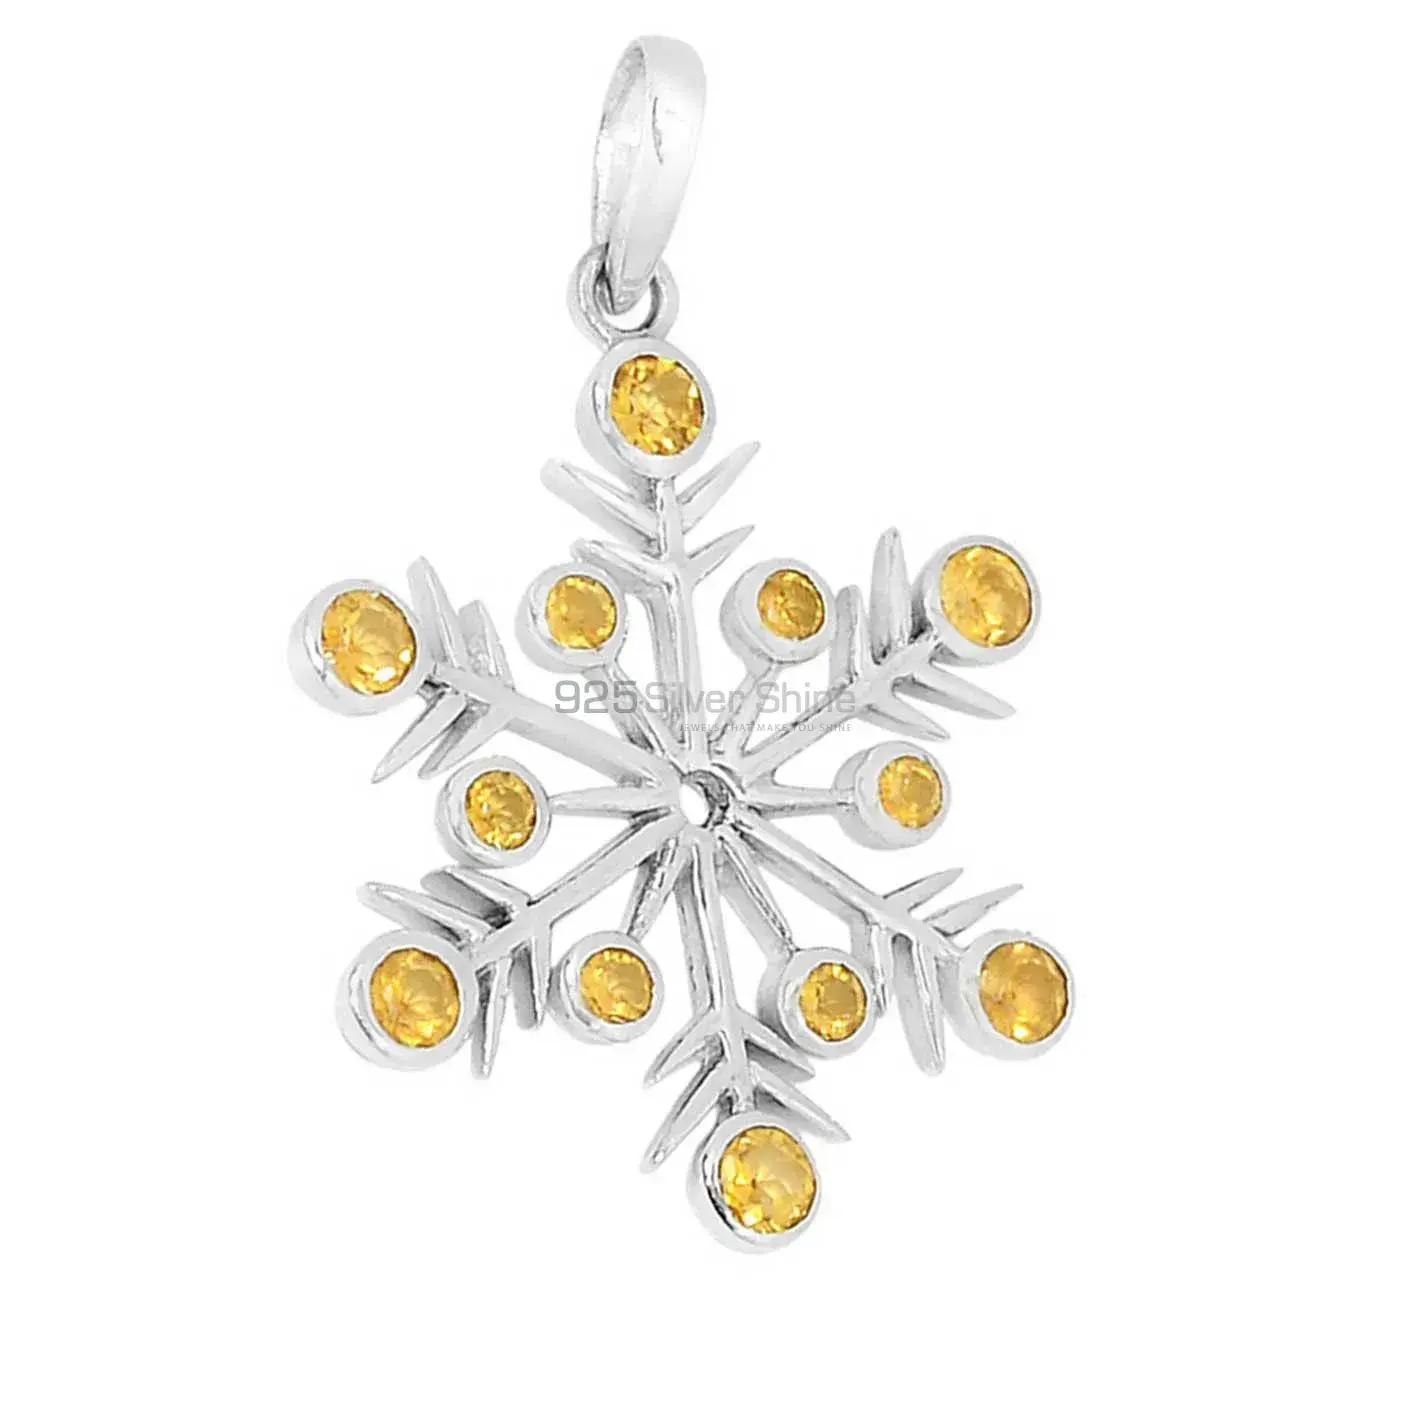 High Quality Solid Sterling Silver Handmade Pendants In Citrine Gemstone Jewelry 925SSP327-1_1